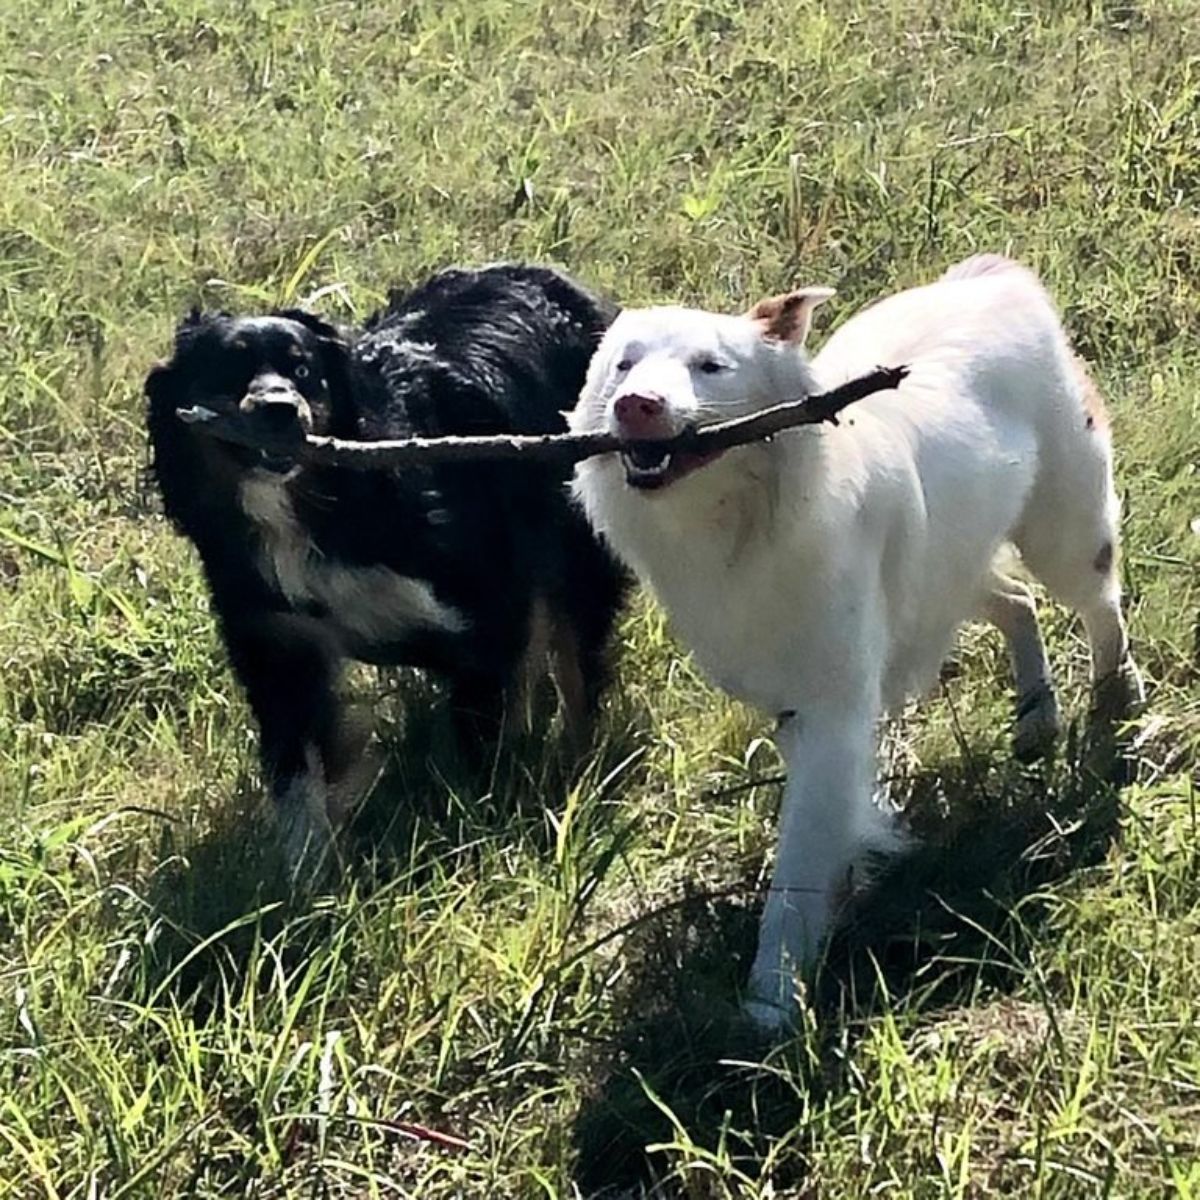 fluffy black and white dog and fluffy white dog holding a stick together